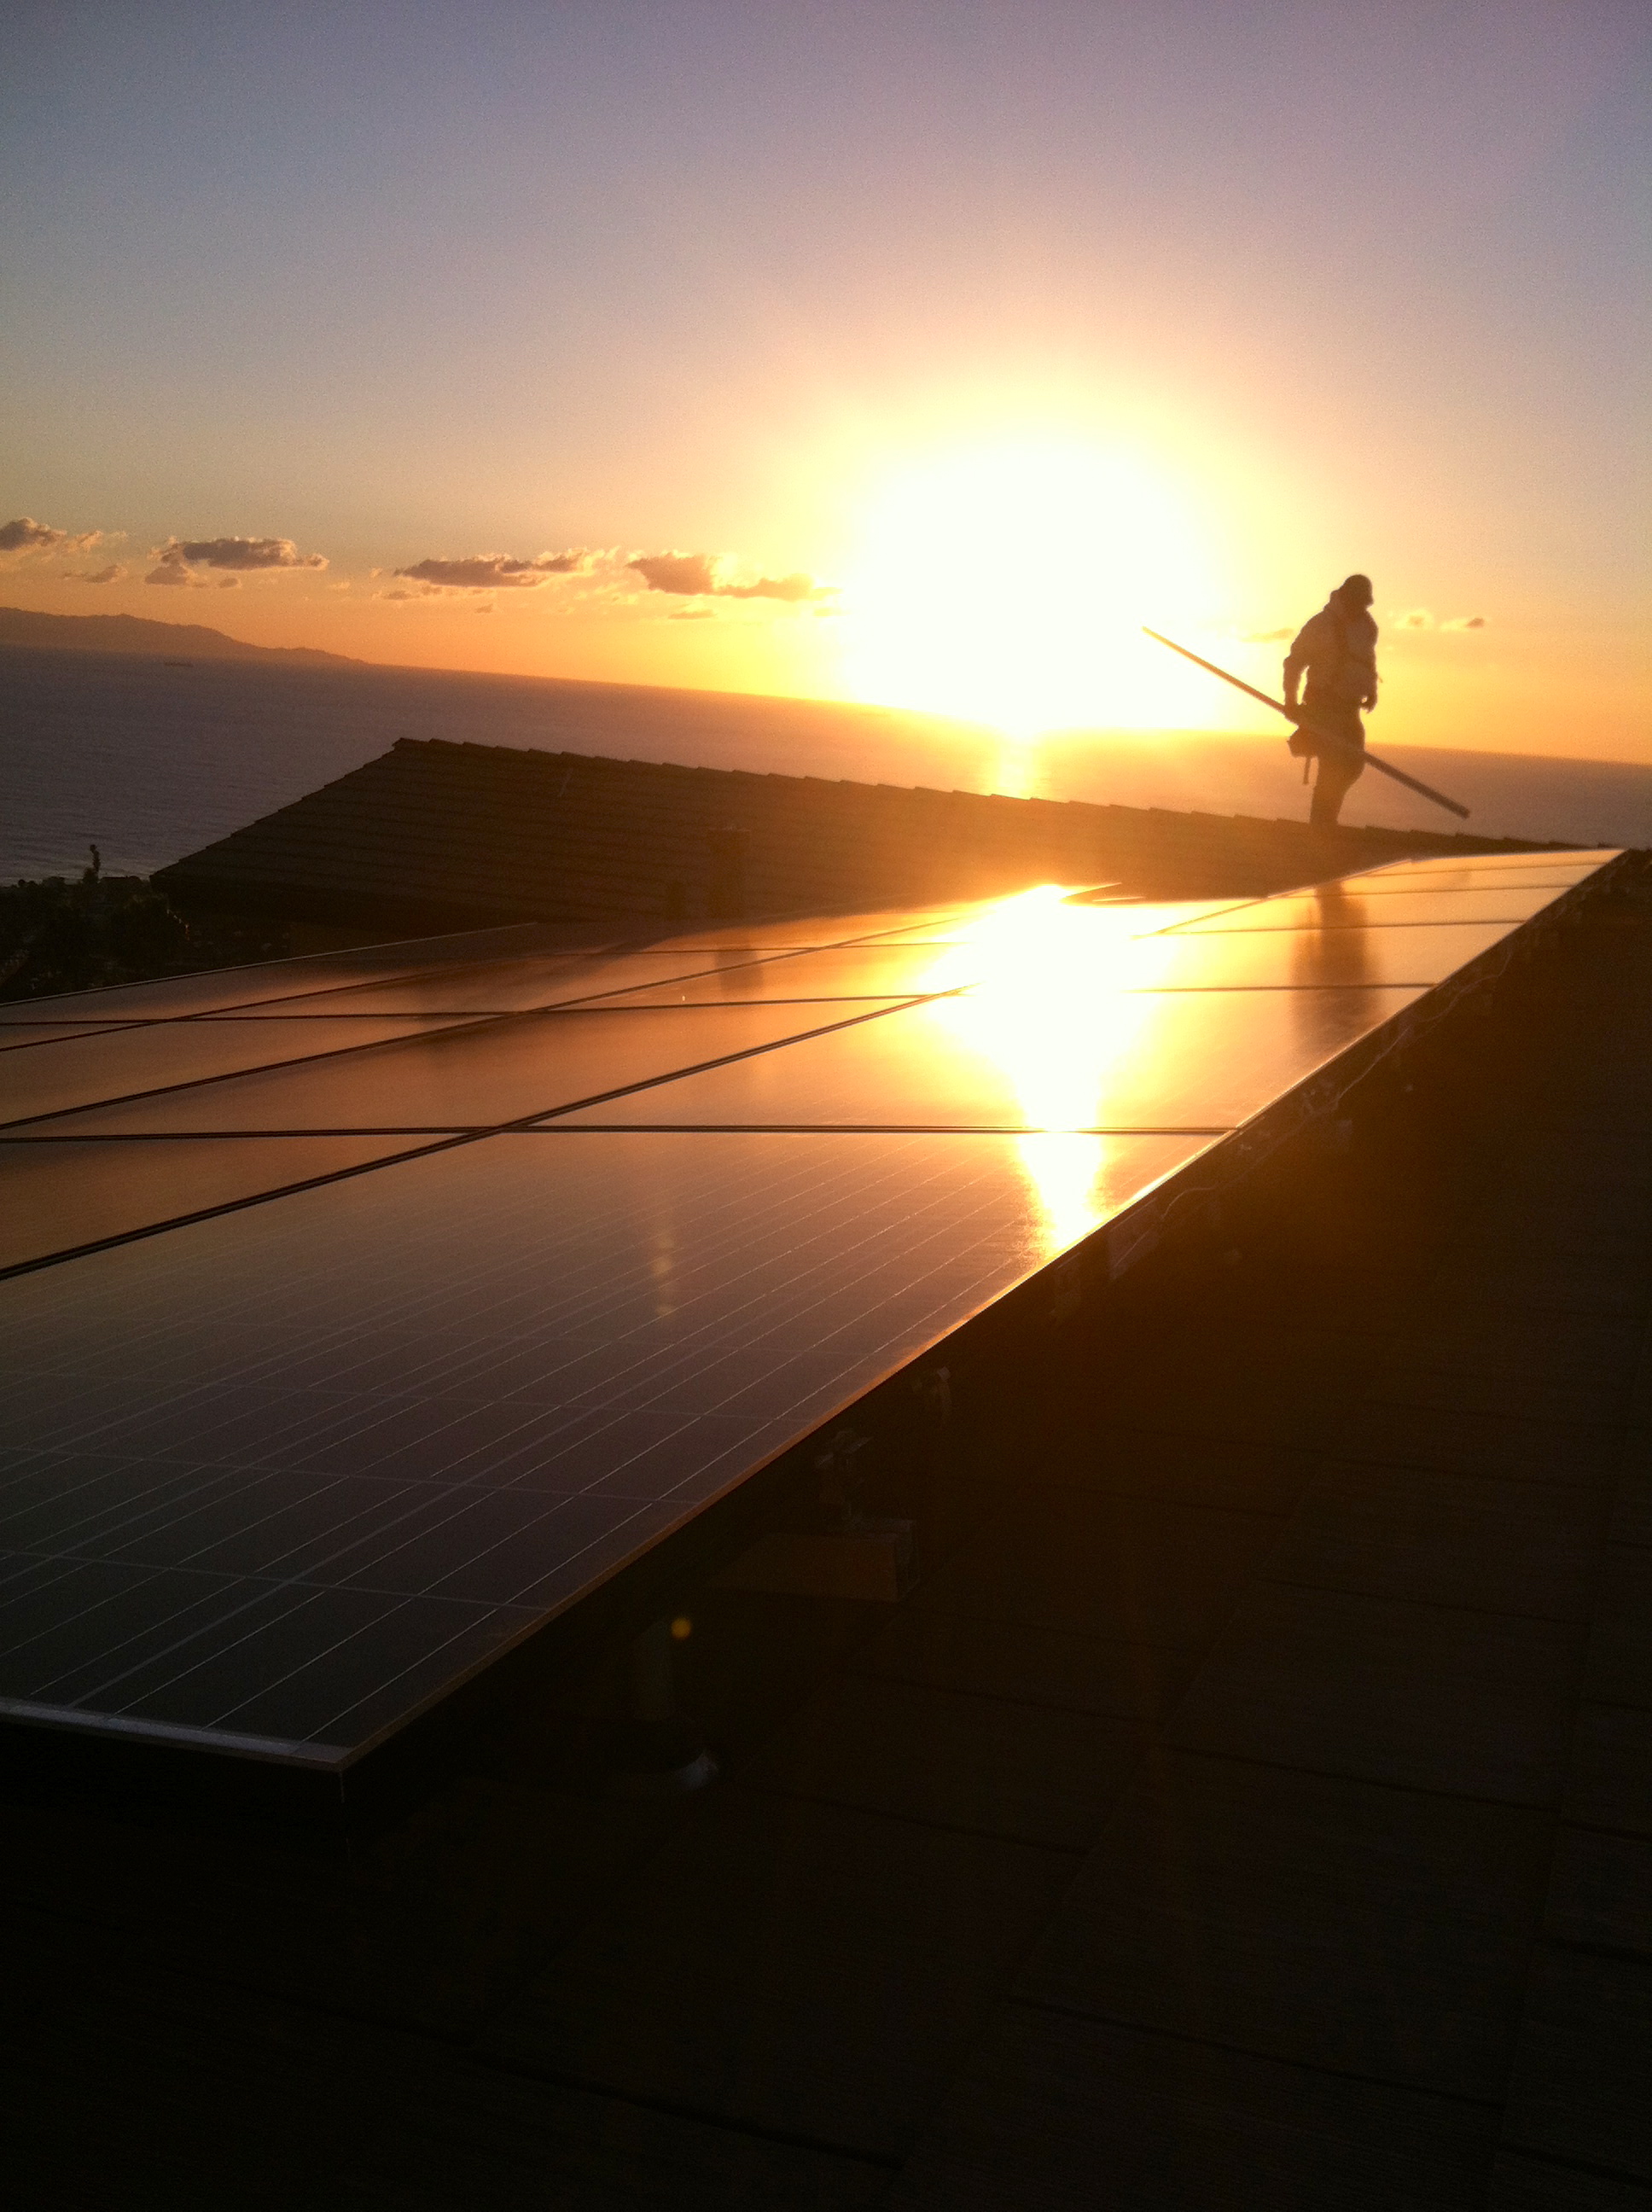 First GAF Solar project installed in San Pedro, California.